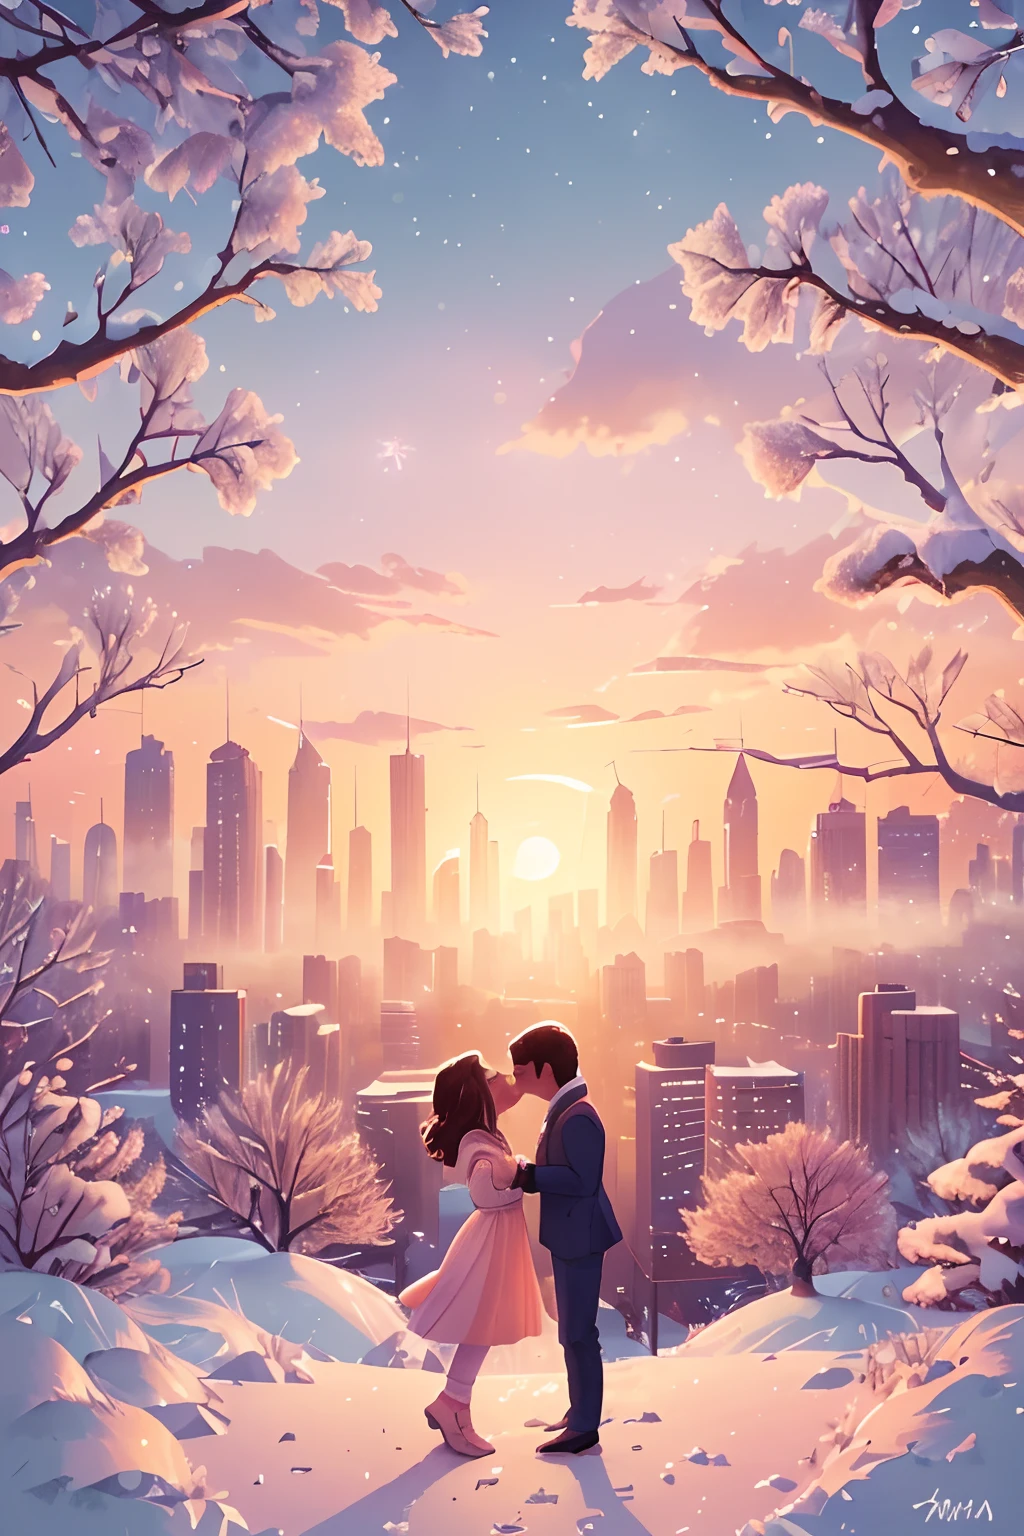 (best quality,4k,8k,highres,masterpiece:1.2),ultra-detailed,(realistic,photorealistic,photo-realistic:1.37),the last sunset before leaving,winter sky at sunset,soft colors,pink orange,blue,mist,rows of trees and buildings,peaceful atmosphere,serene winter landscape,subtle hues,receding sunlight,golden hour,quiet streets,gentle breeze,kiss of warmth,city silhouette,icy branches,elegant architecture,wistful mood,majestic skyline,little snowflakes dancing,final goodbye.